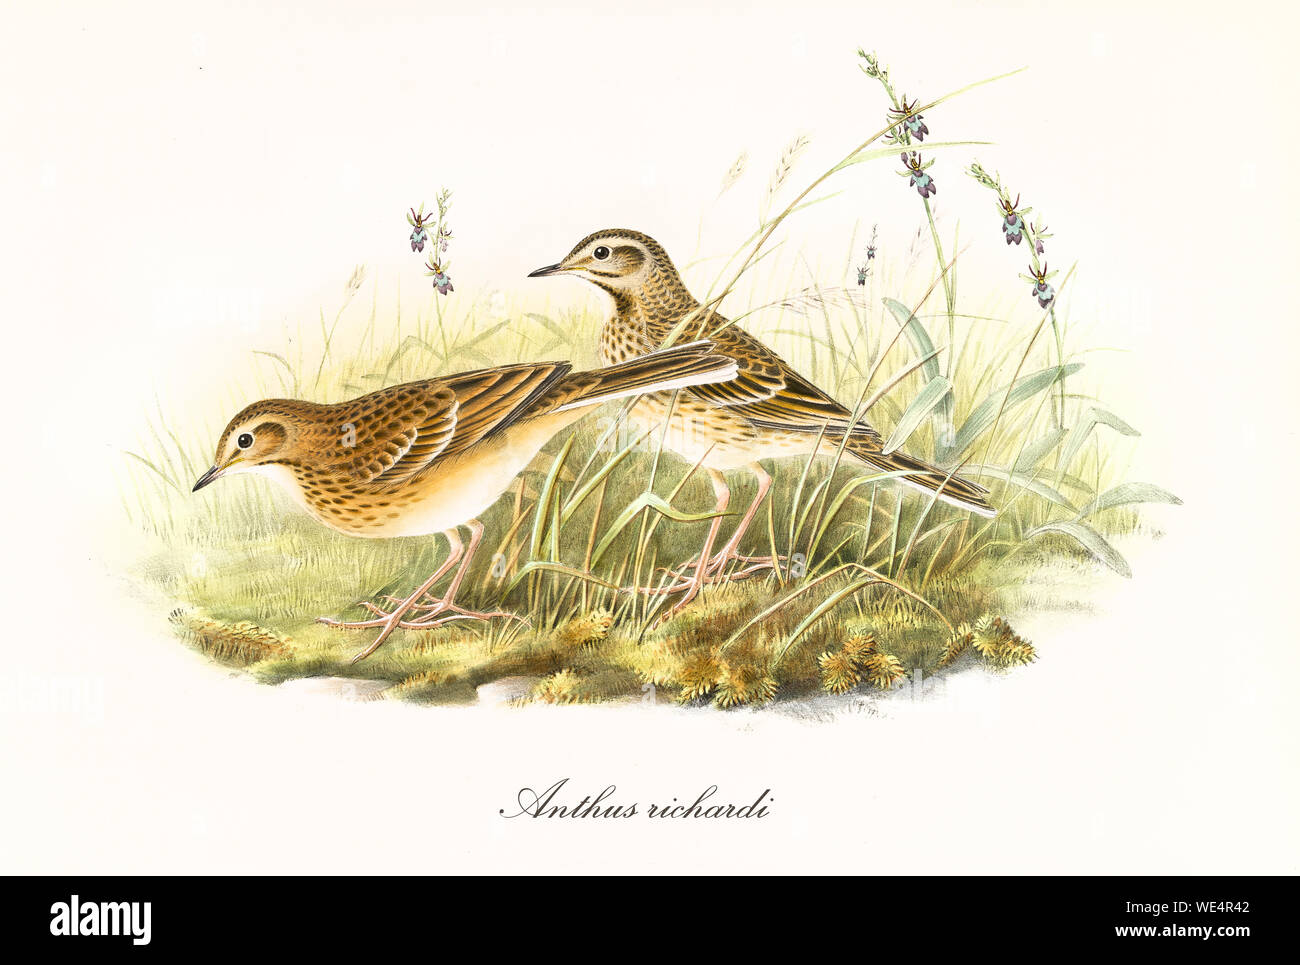 Two brownish and black dotted birds on a grassy surface looking for food. Vintage style hand colored illustration, rich of details, by John Gould publ. In London 1862 - 1873 Stock Photo